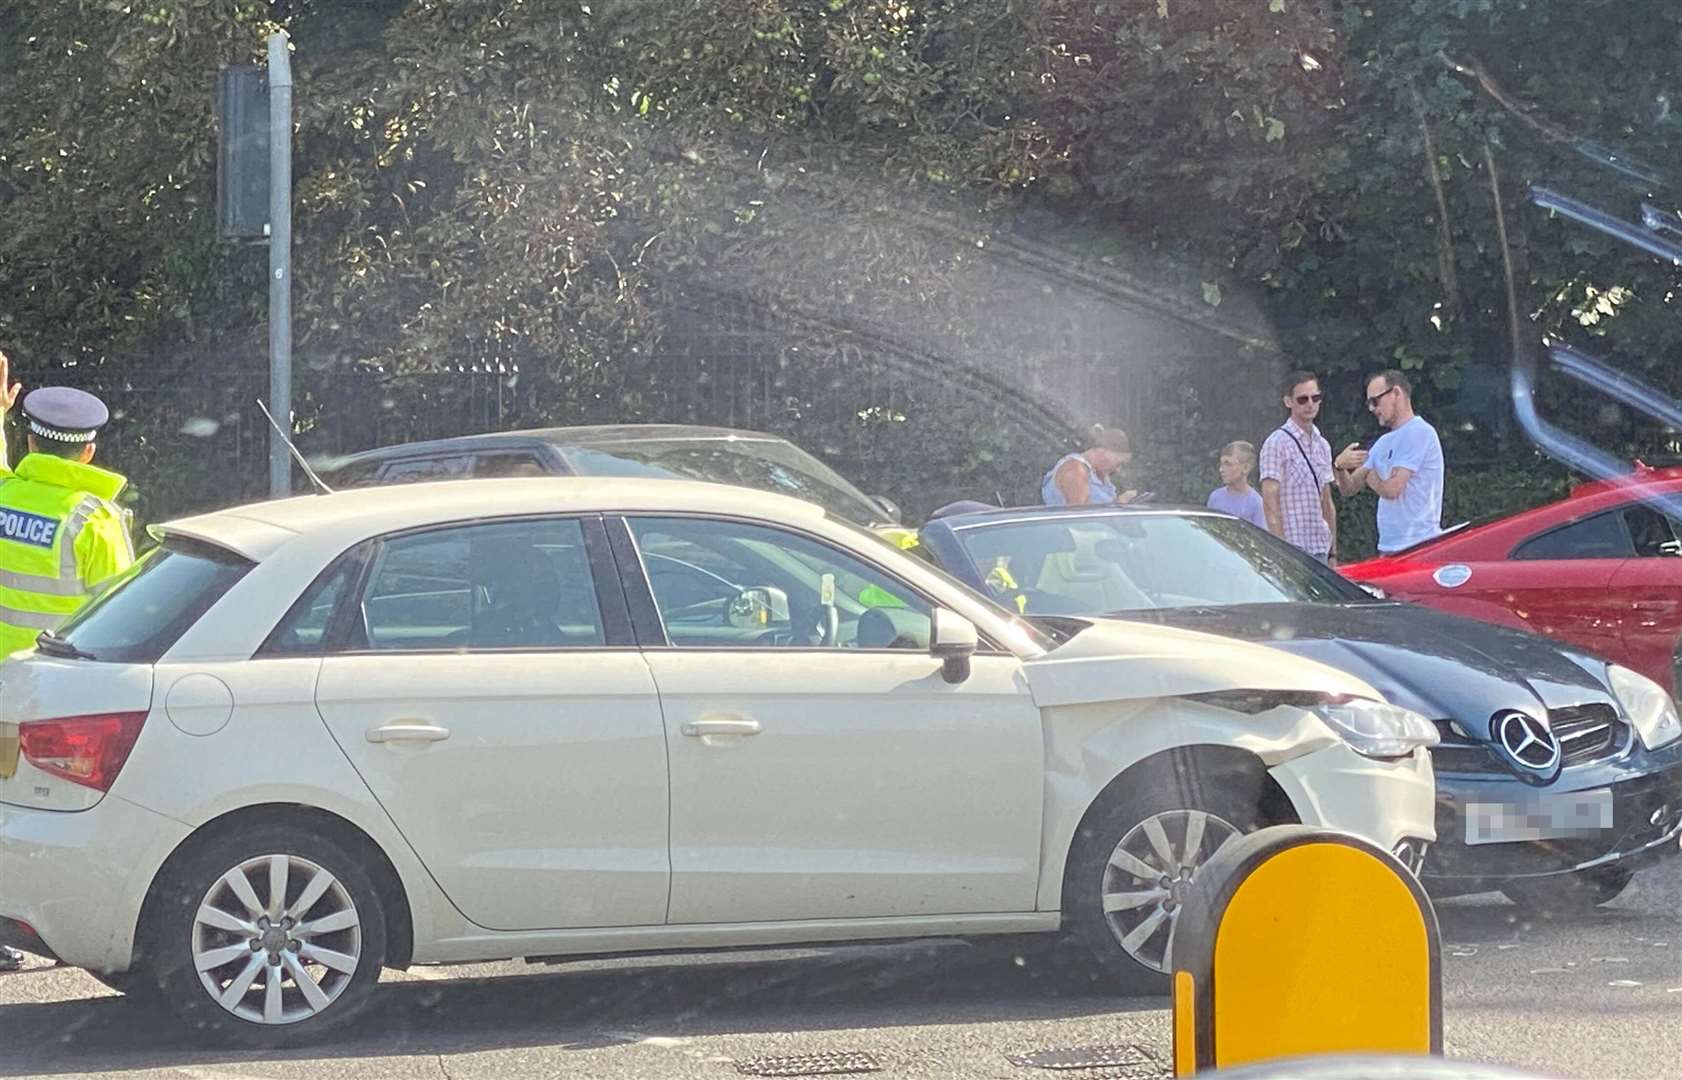 An eyewitness reported three vehicles are thought to have been involved in the incident on the A229 near Maidstone